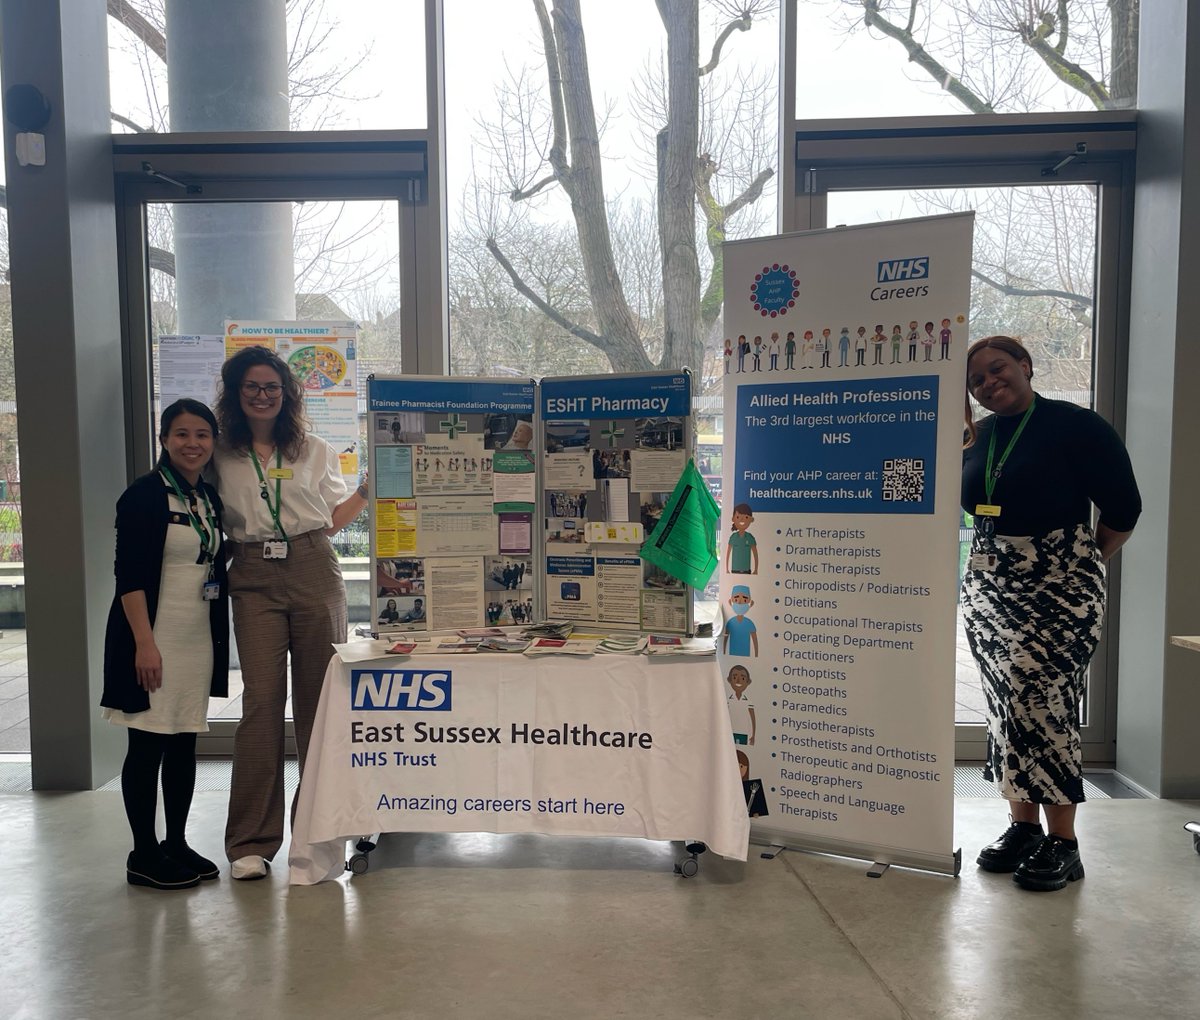 Our Trainee Pharmacists Maria and Adanna had an amazing time speaking to our Pharmacy Undergraduates and Aspirers at the Uni of Brighton Careers Fair Day! Message us if you would like to know more about your exciting Trainee Pharmacist Foundation Year at ESHT!